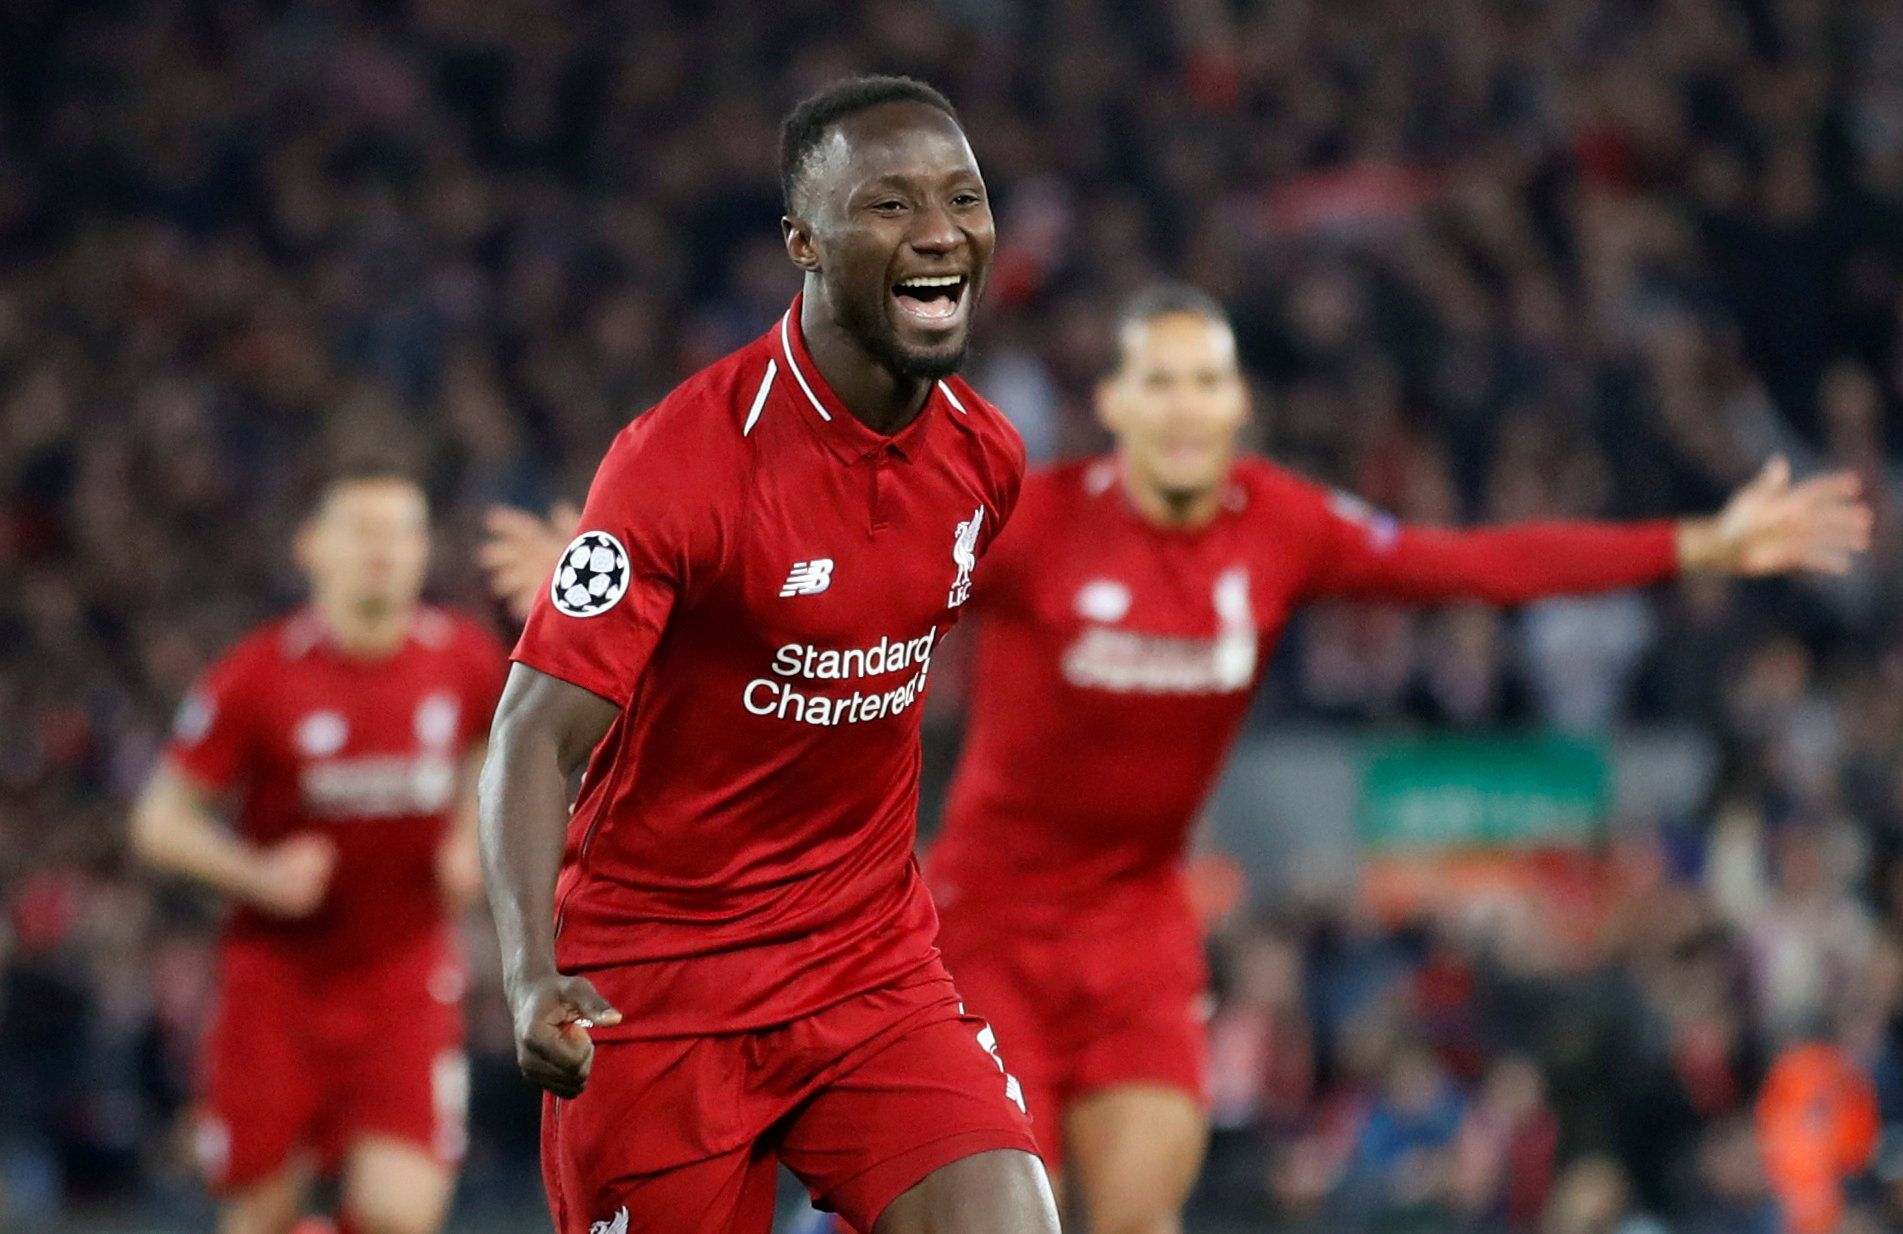 Soccer Football - Champions League Quarter Final First Leg - Liverpool v FC Porto - Anfield, Liverpool, Britain - April 9, 2019  Liverpool's Naby Keita celebrates scoring their first goal  Action Images via Reuters/Carl Recine